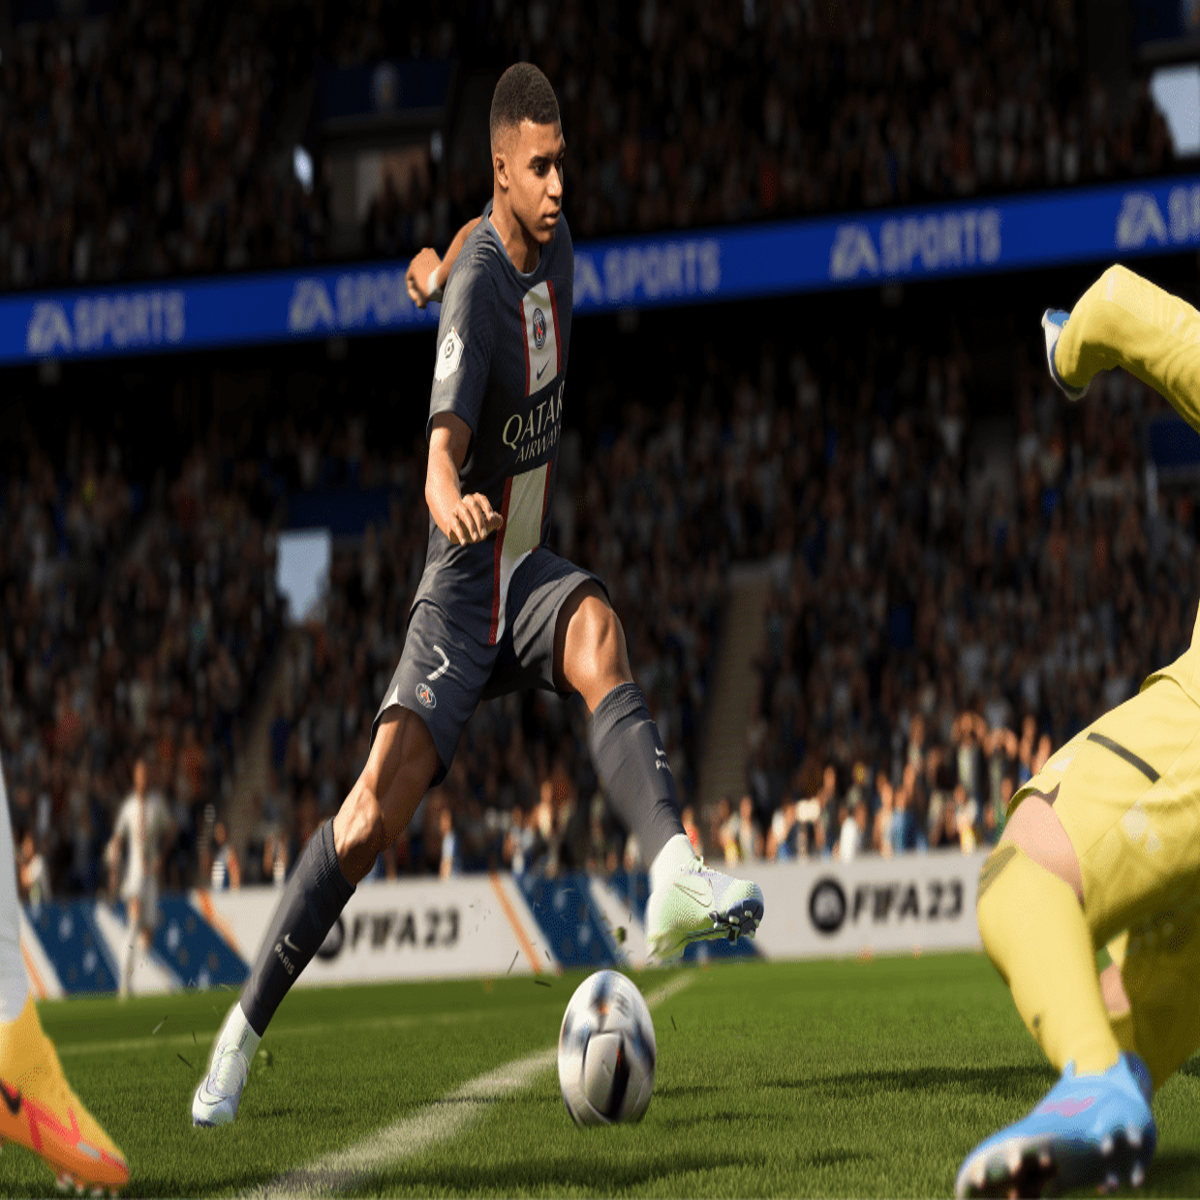 FIFA 23 Juventus Career Mode Guide: Starting Lineup, Who to Sign & more